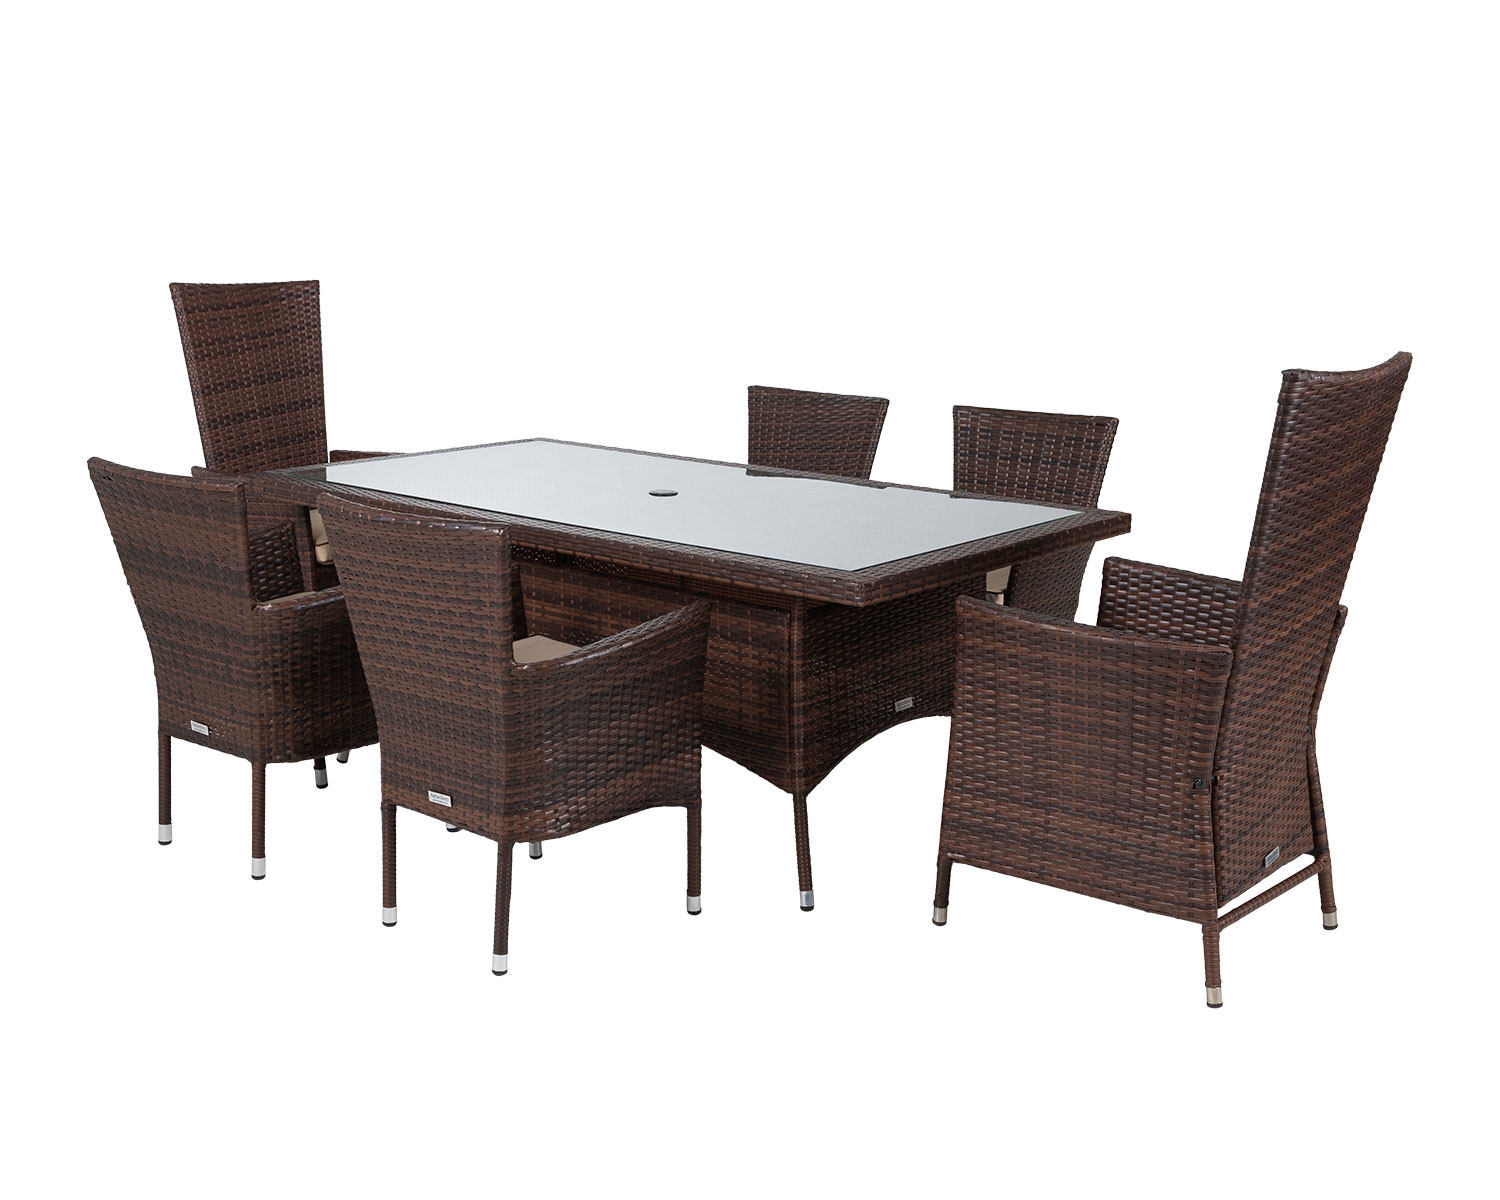 Rectangular Rattan Garden Dining Table Set With 6 Chairs in Brown